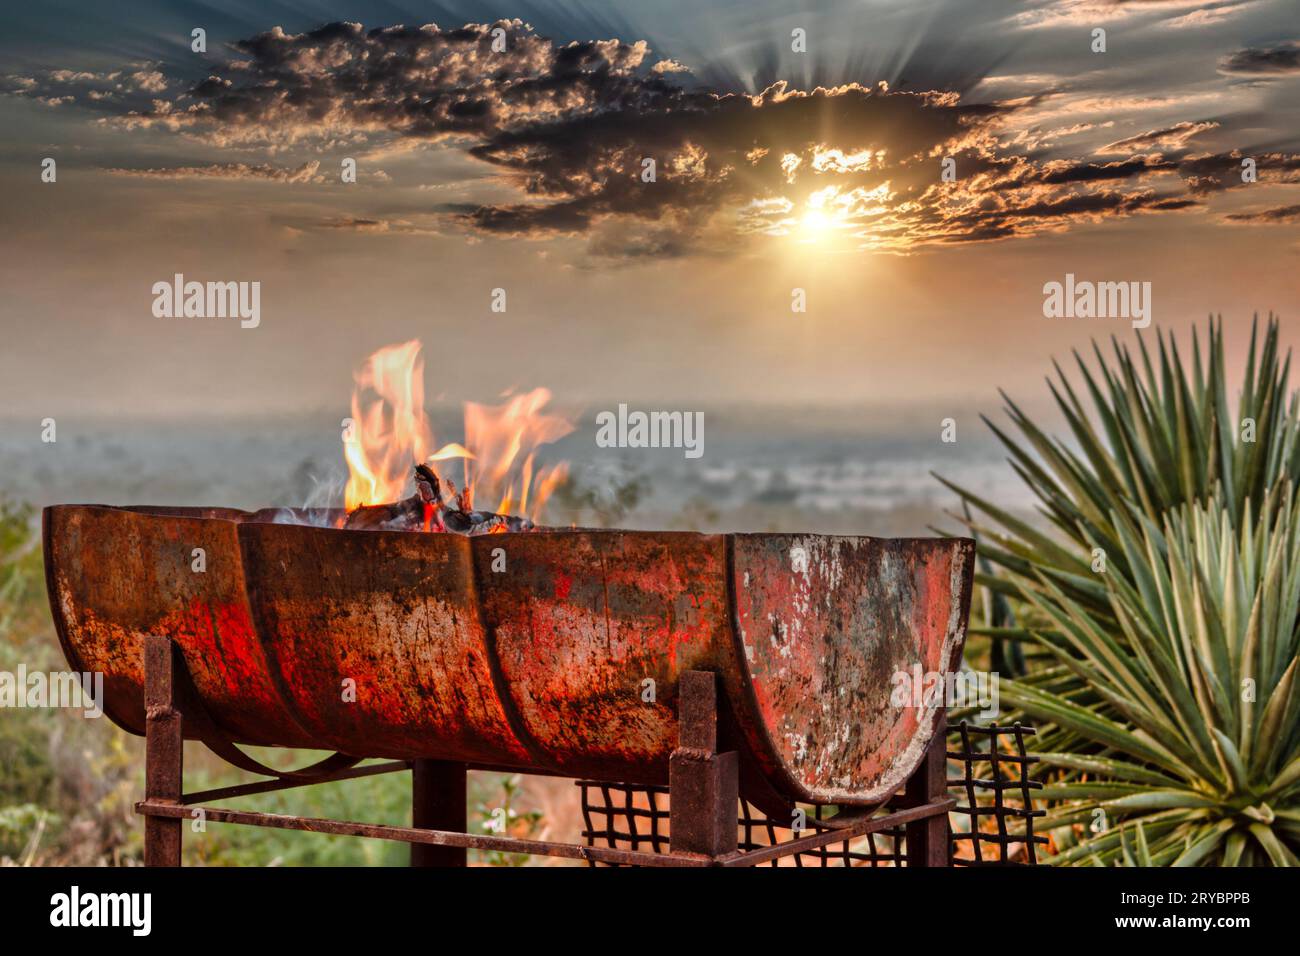 https://c8.alamy.com/comp/2RYBPPB/braai-in-south-africa-or-barbecue-grill-especially-an-open-outdoor-grill-built-specifically-for-the-purpose-of-braaing-a-social-meeting-including-t-2RYBPPB.jpg